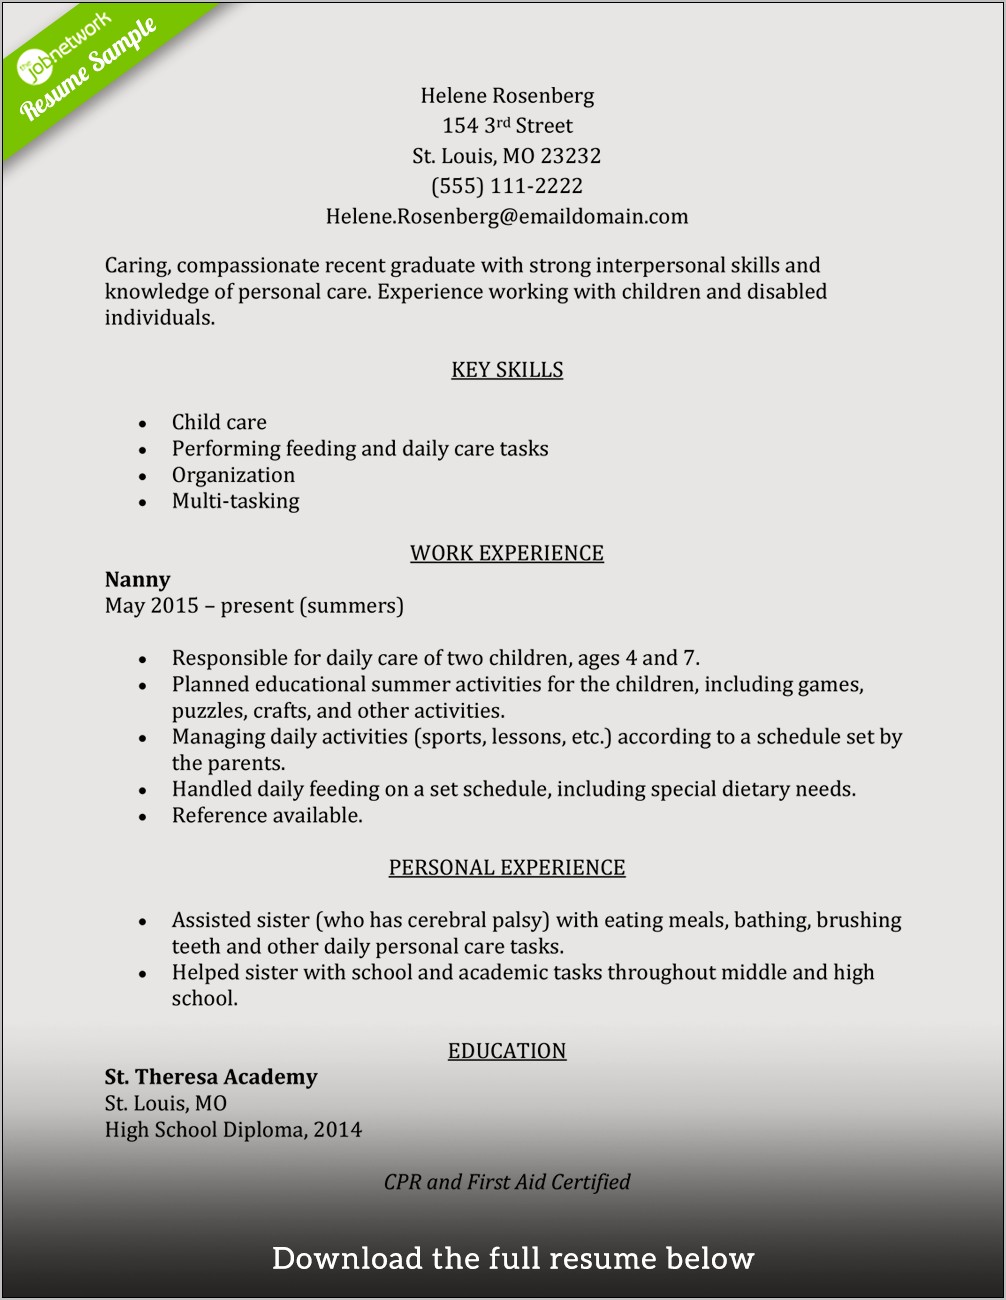 Resume Objective For Working With Children